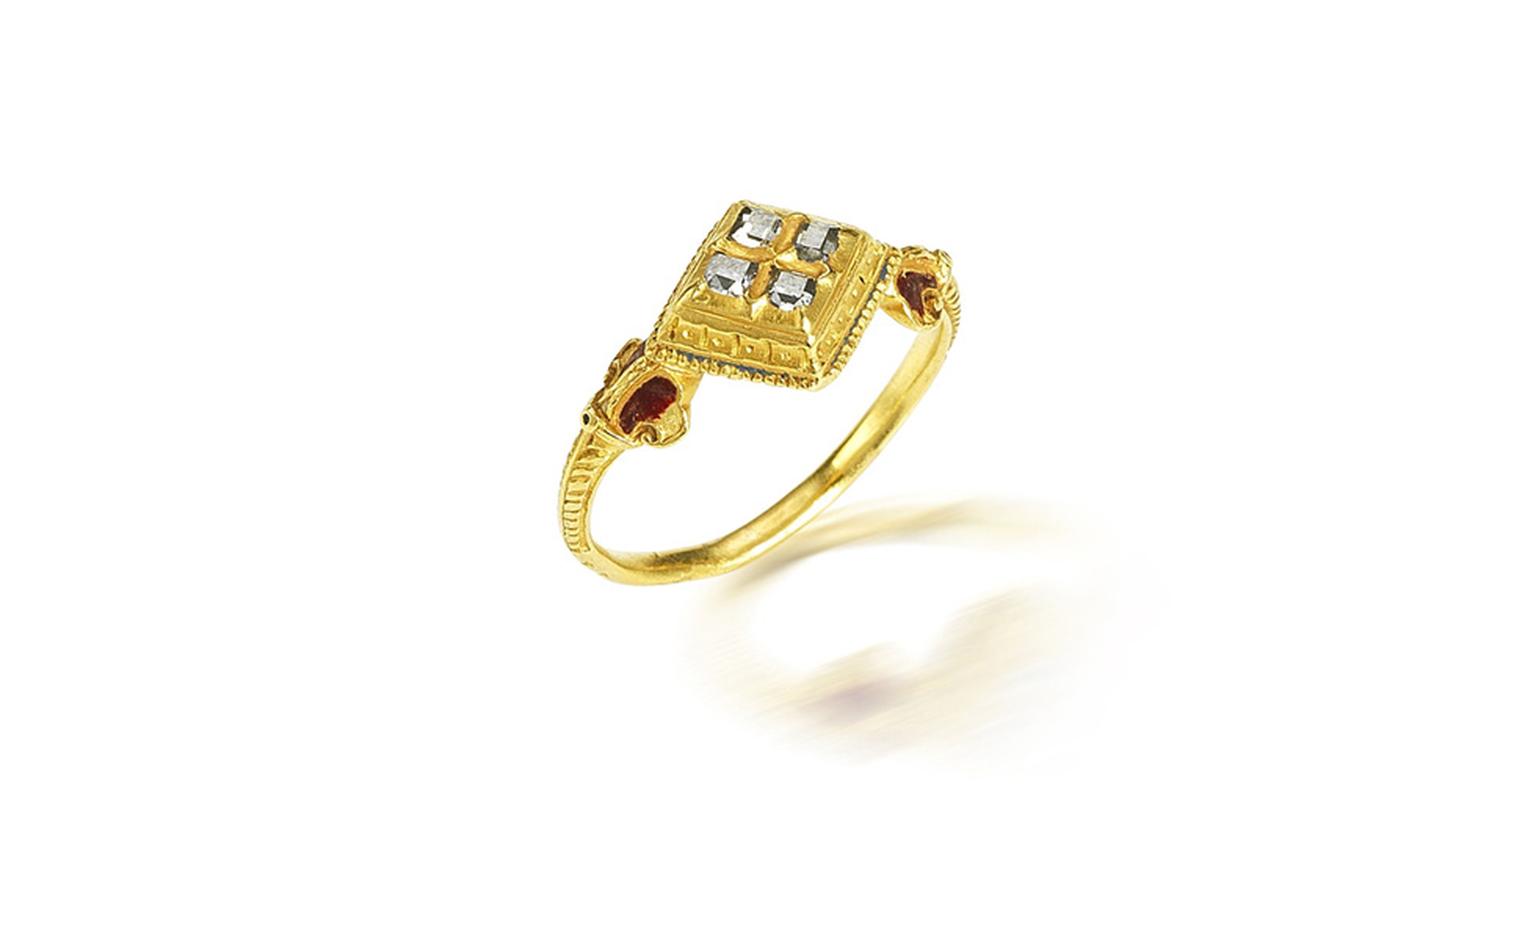 Lot 21. A gold and diamond ring, probably 17th century. Estimate £4,000-6,000. SOLD FOR £8,750.